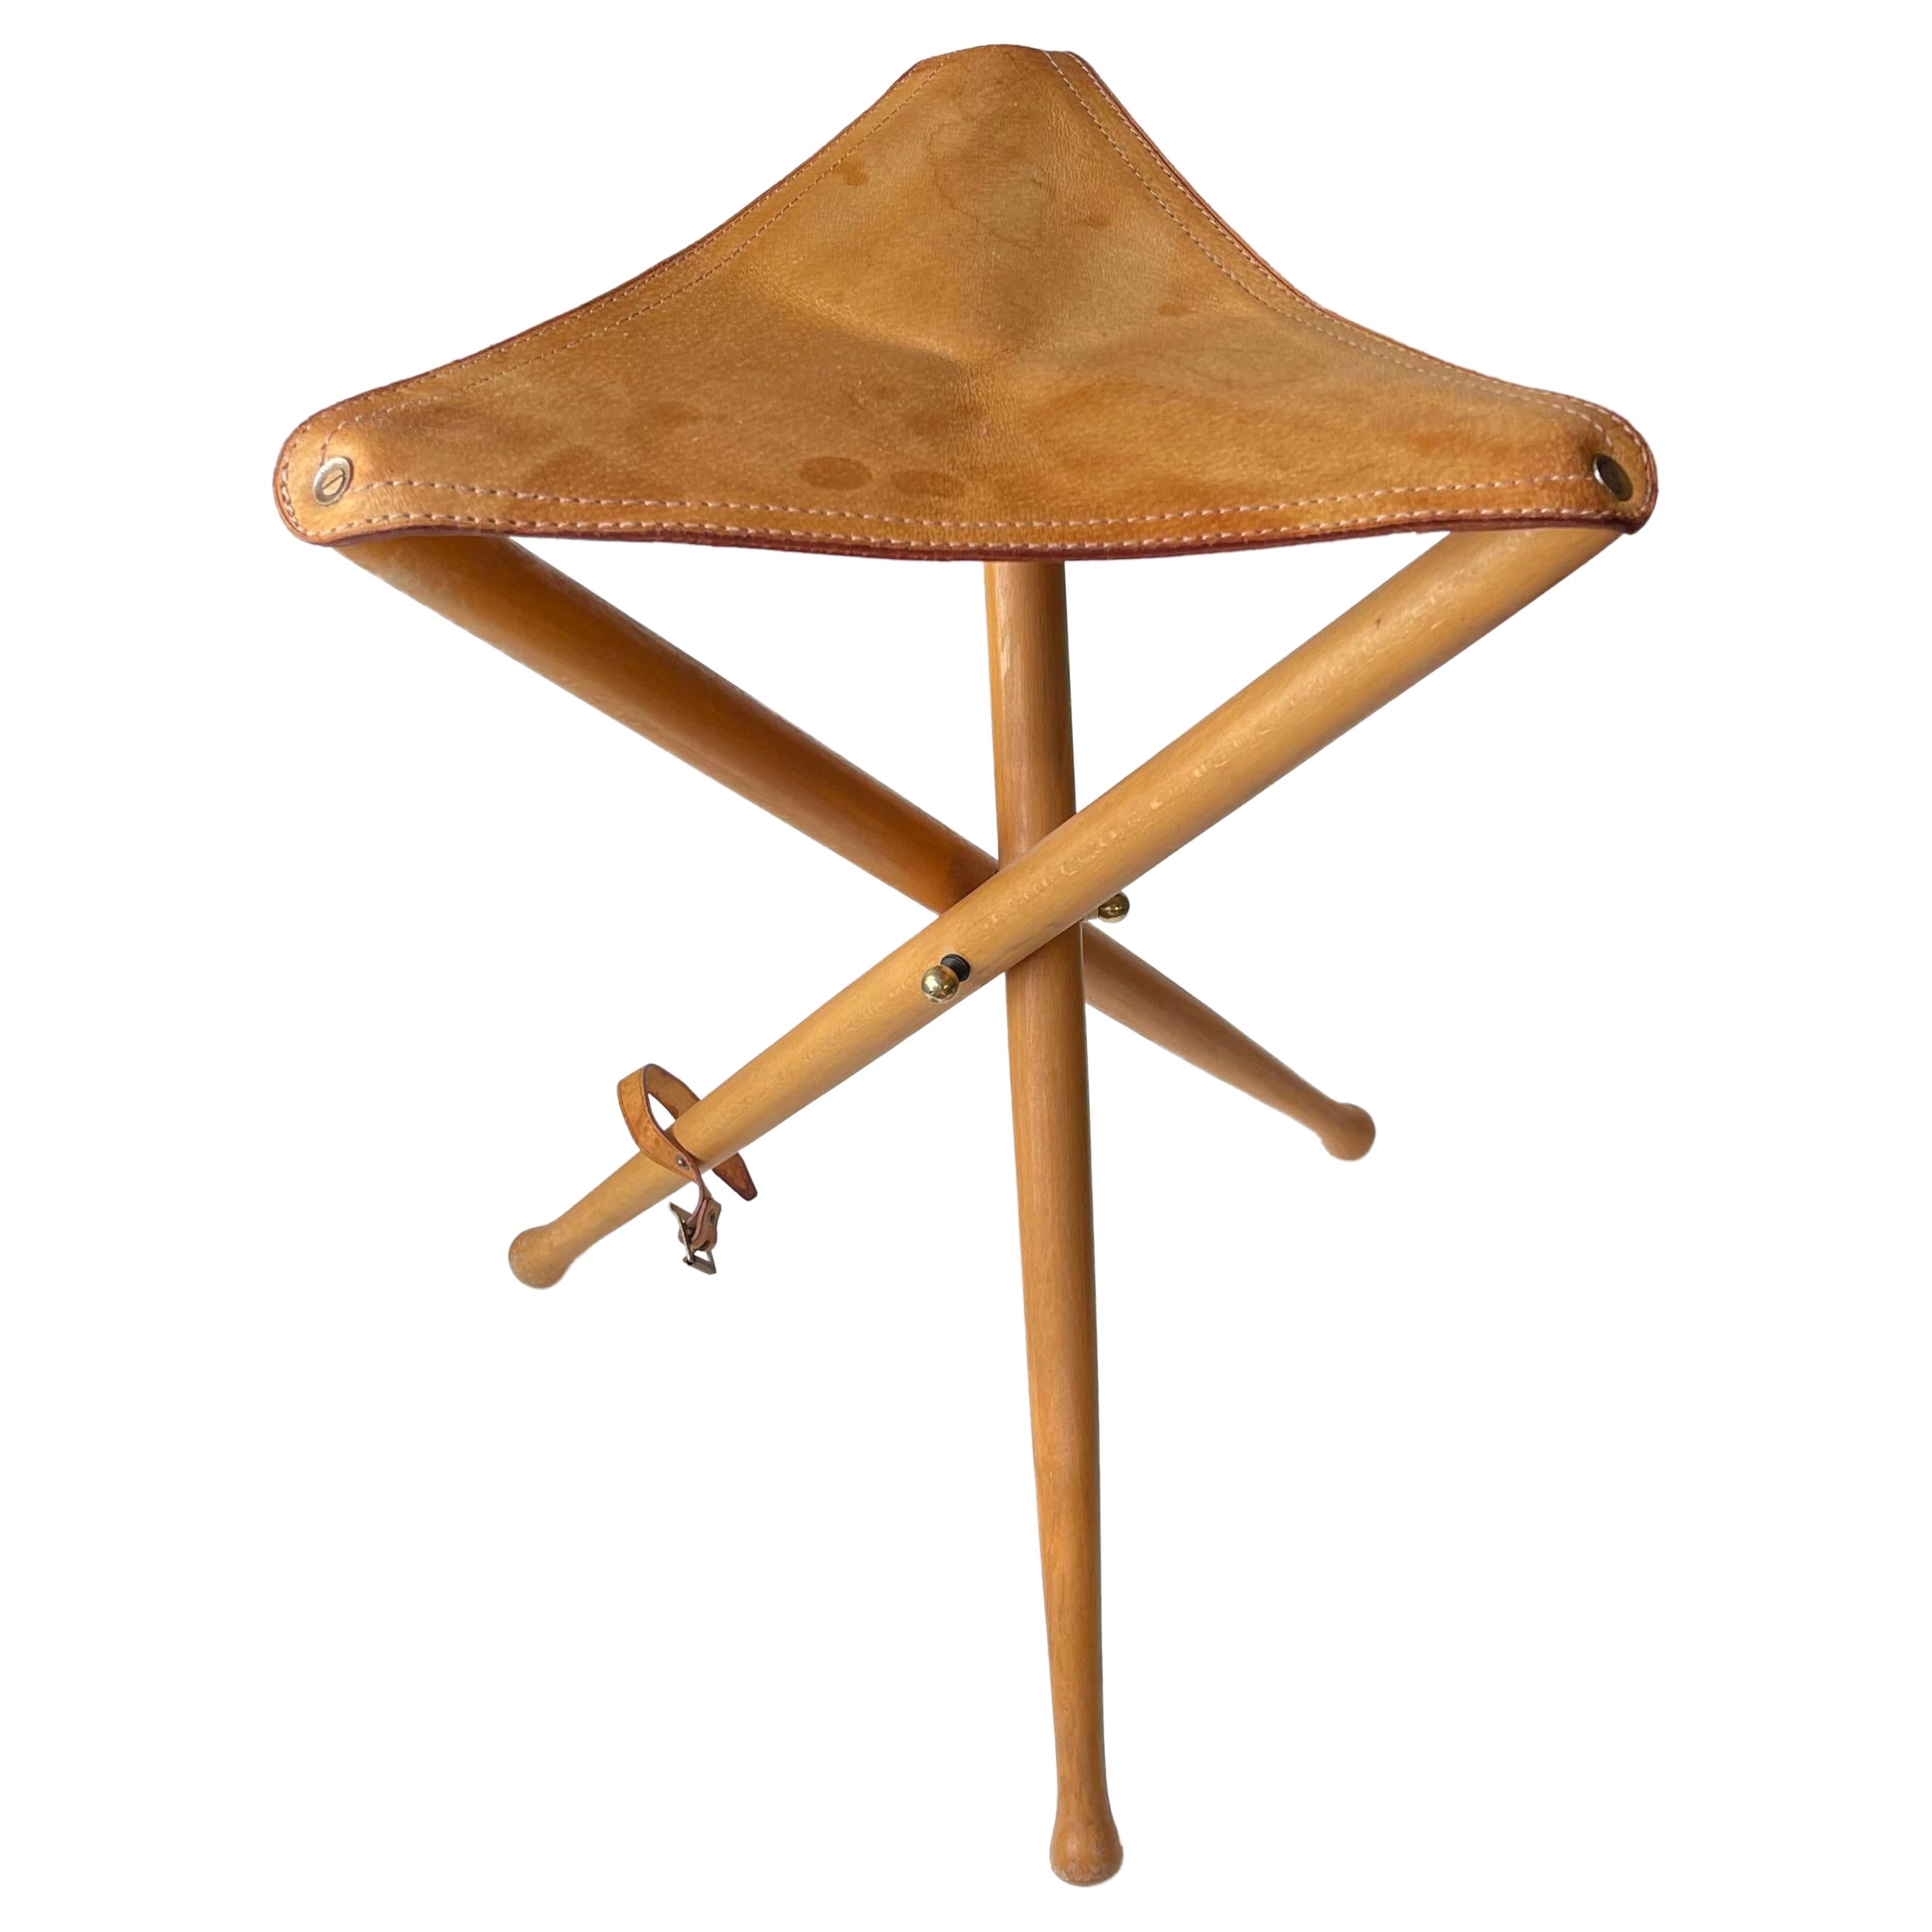 Vintage Scandinavian Folding Tripod Hunting Stool in Leather and Beech, 1970s For Sale